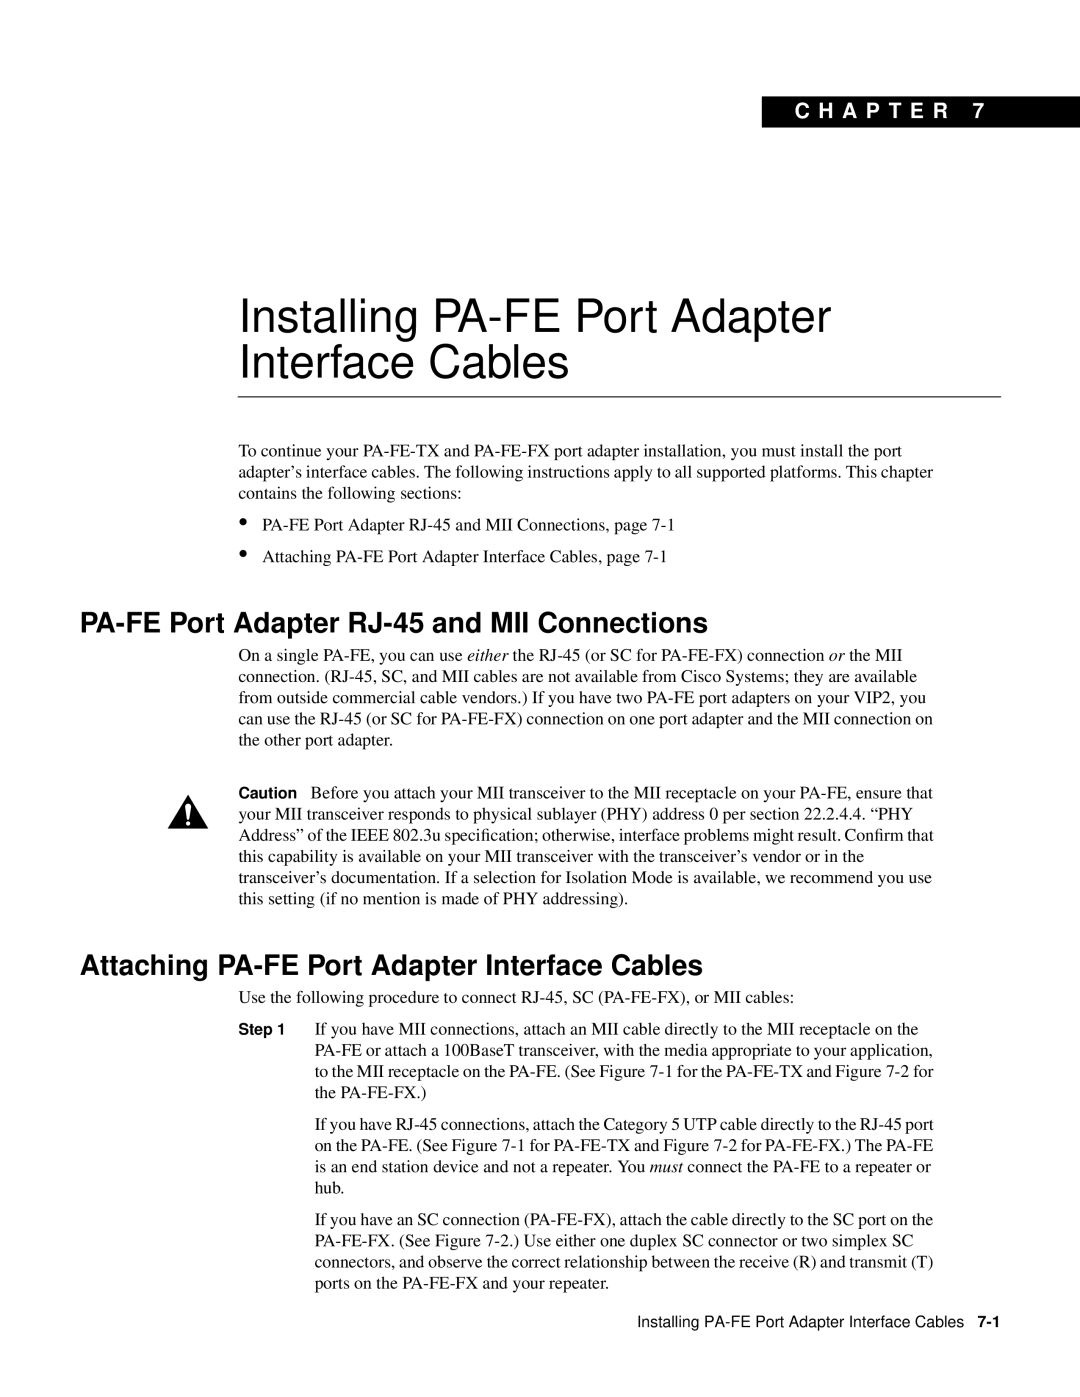 Cisco Systems PA-FE-FX manual Installing PA-FE Port Adapter Interface Cables, PA-FE Port Adapter RJ-45 and MII Connections 